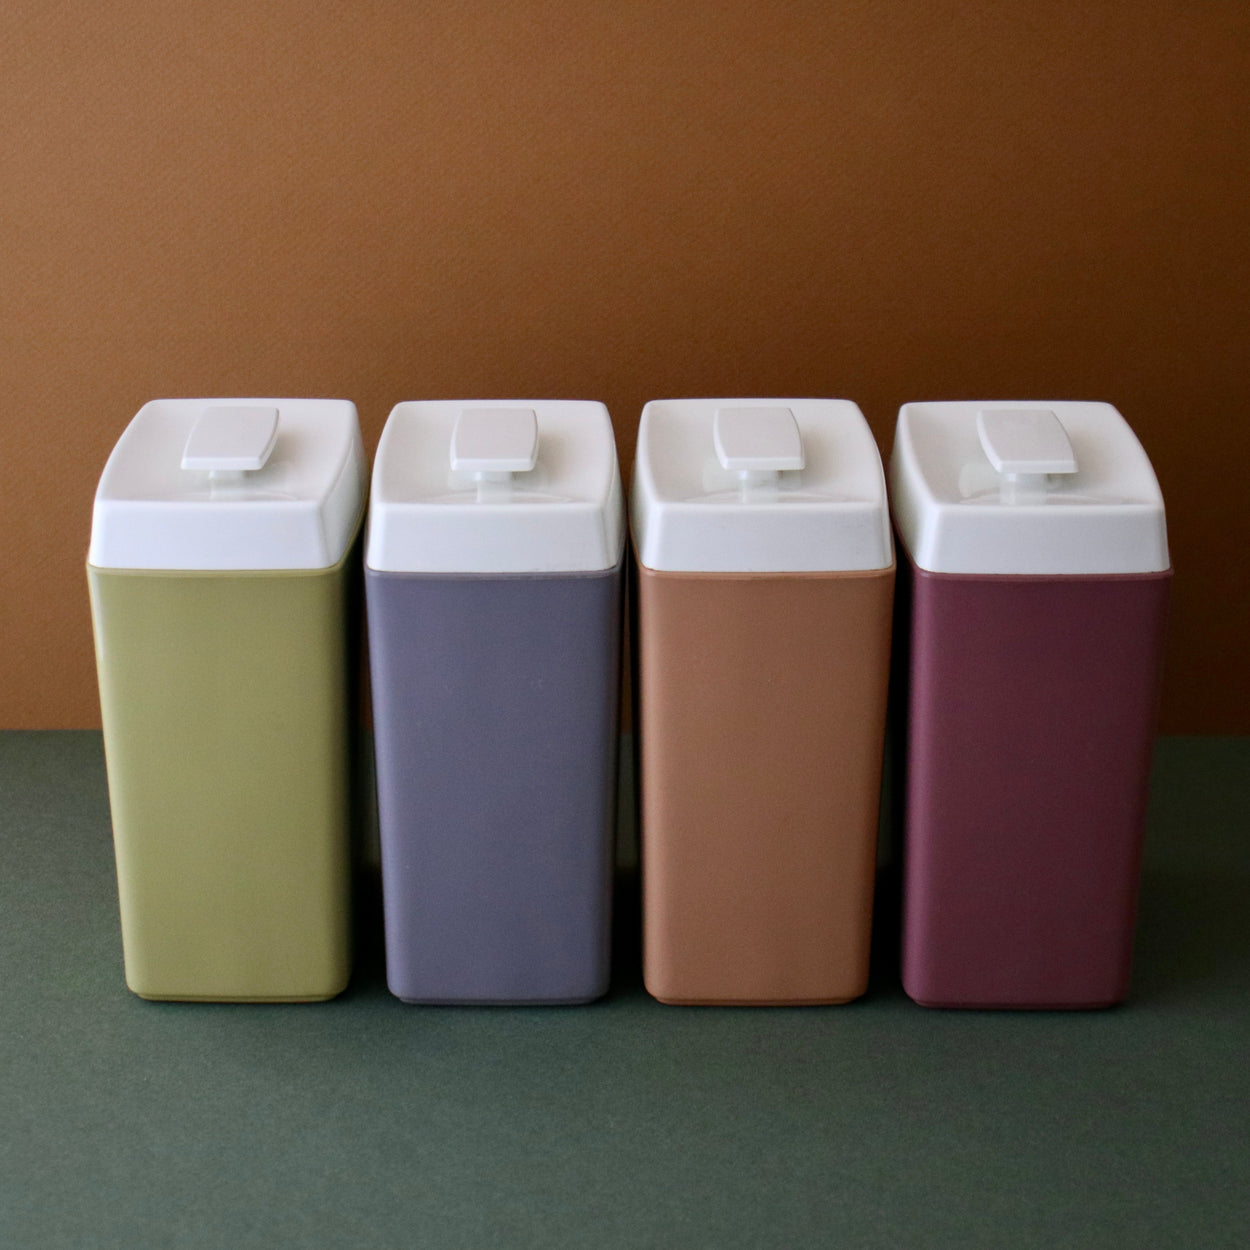 Vintage set of 4 Nylex Kitchen canisters against a brown and green backdrop.